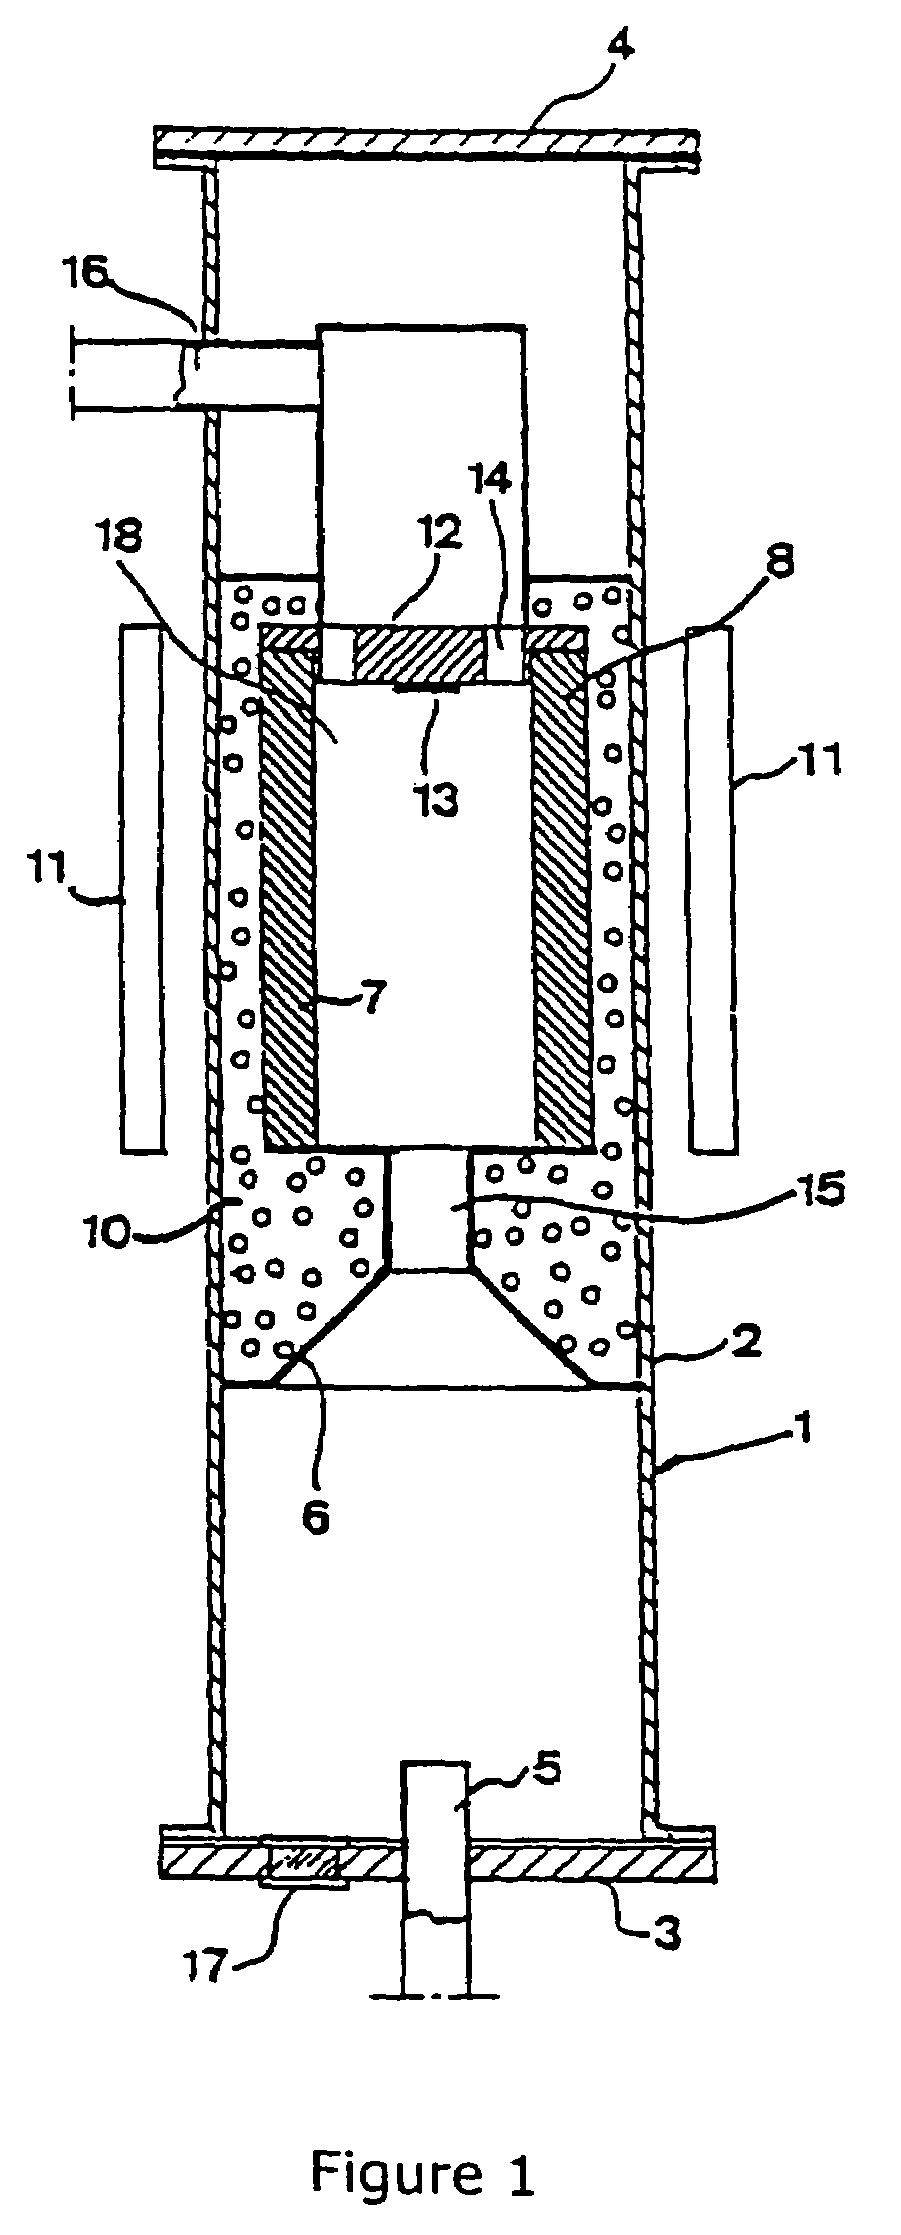 Device and method for producing single crystals by vapor deposition